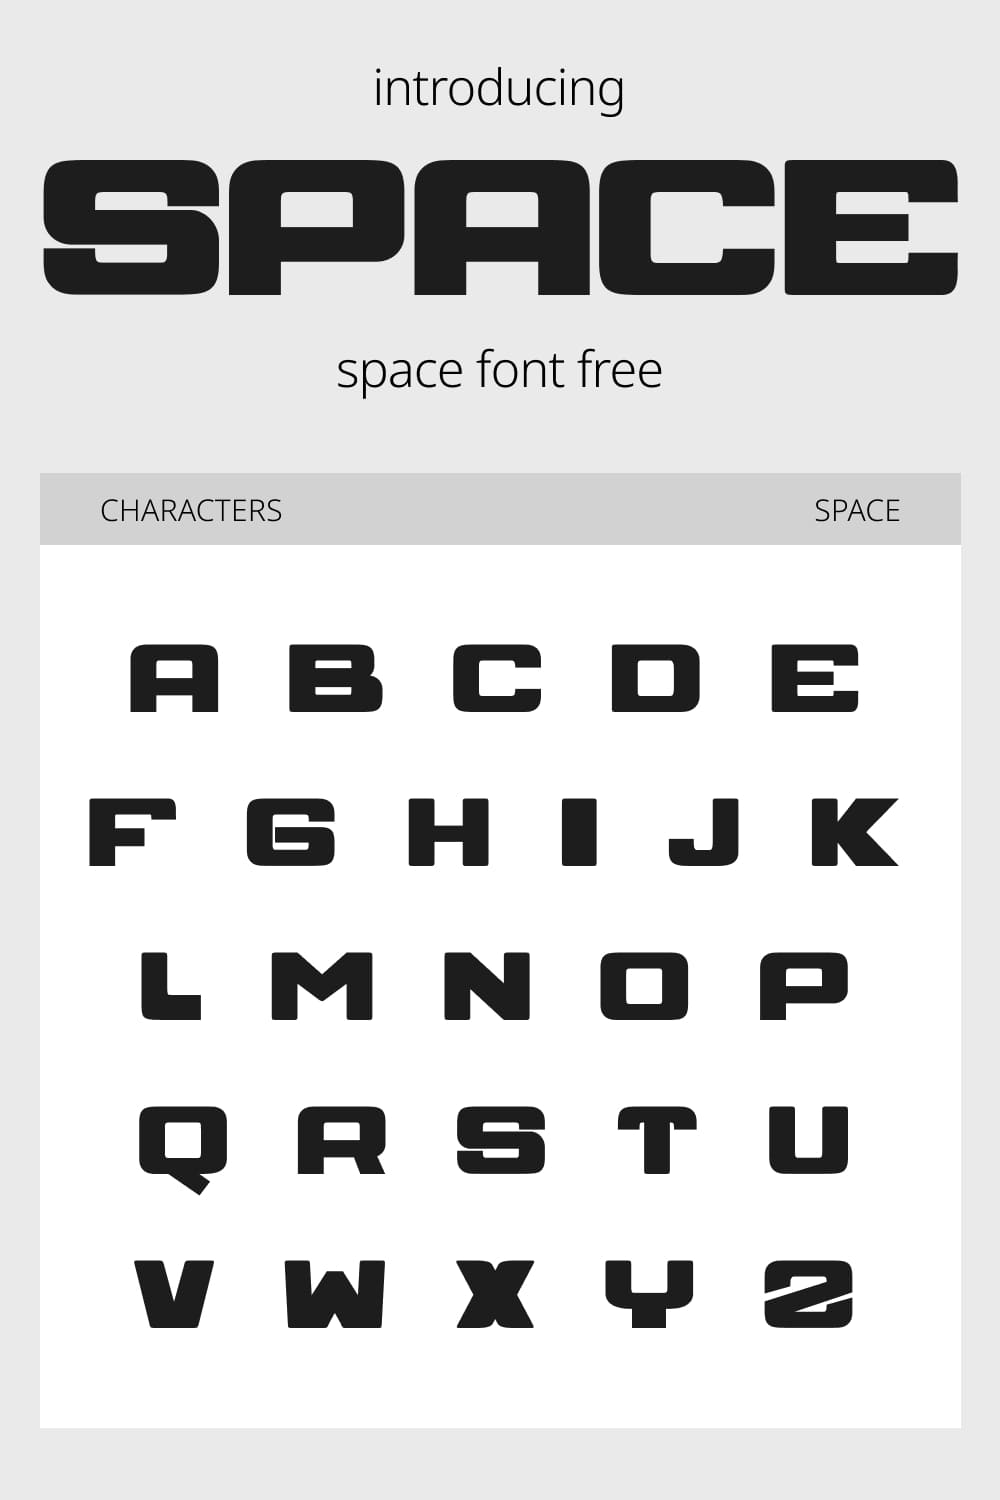 Space font free Pinterest Collage Image with Alphabet by MasterBundles.